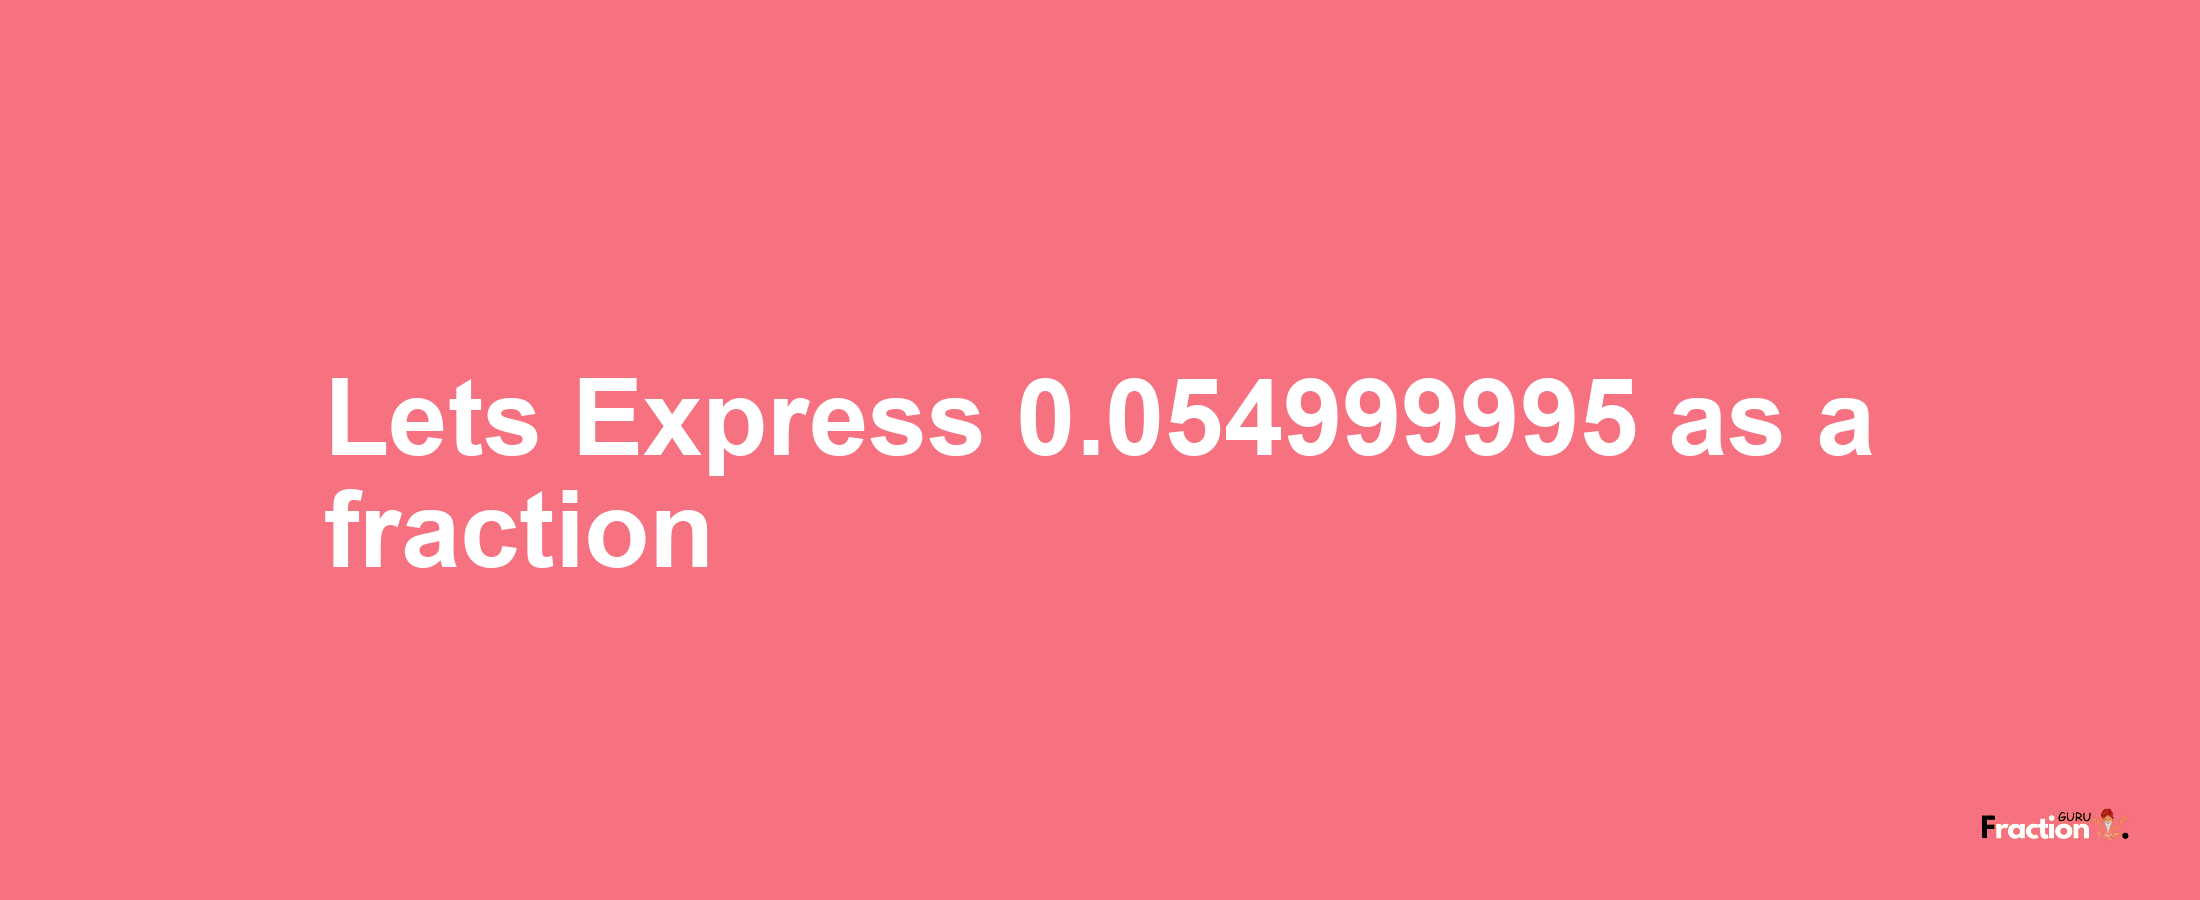 Lets Express 0.054999995 as afraction